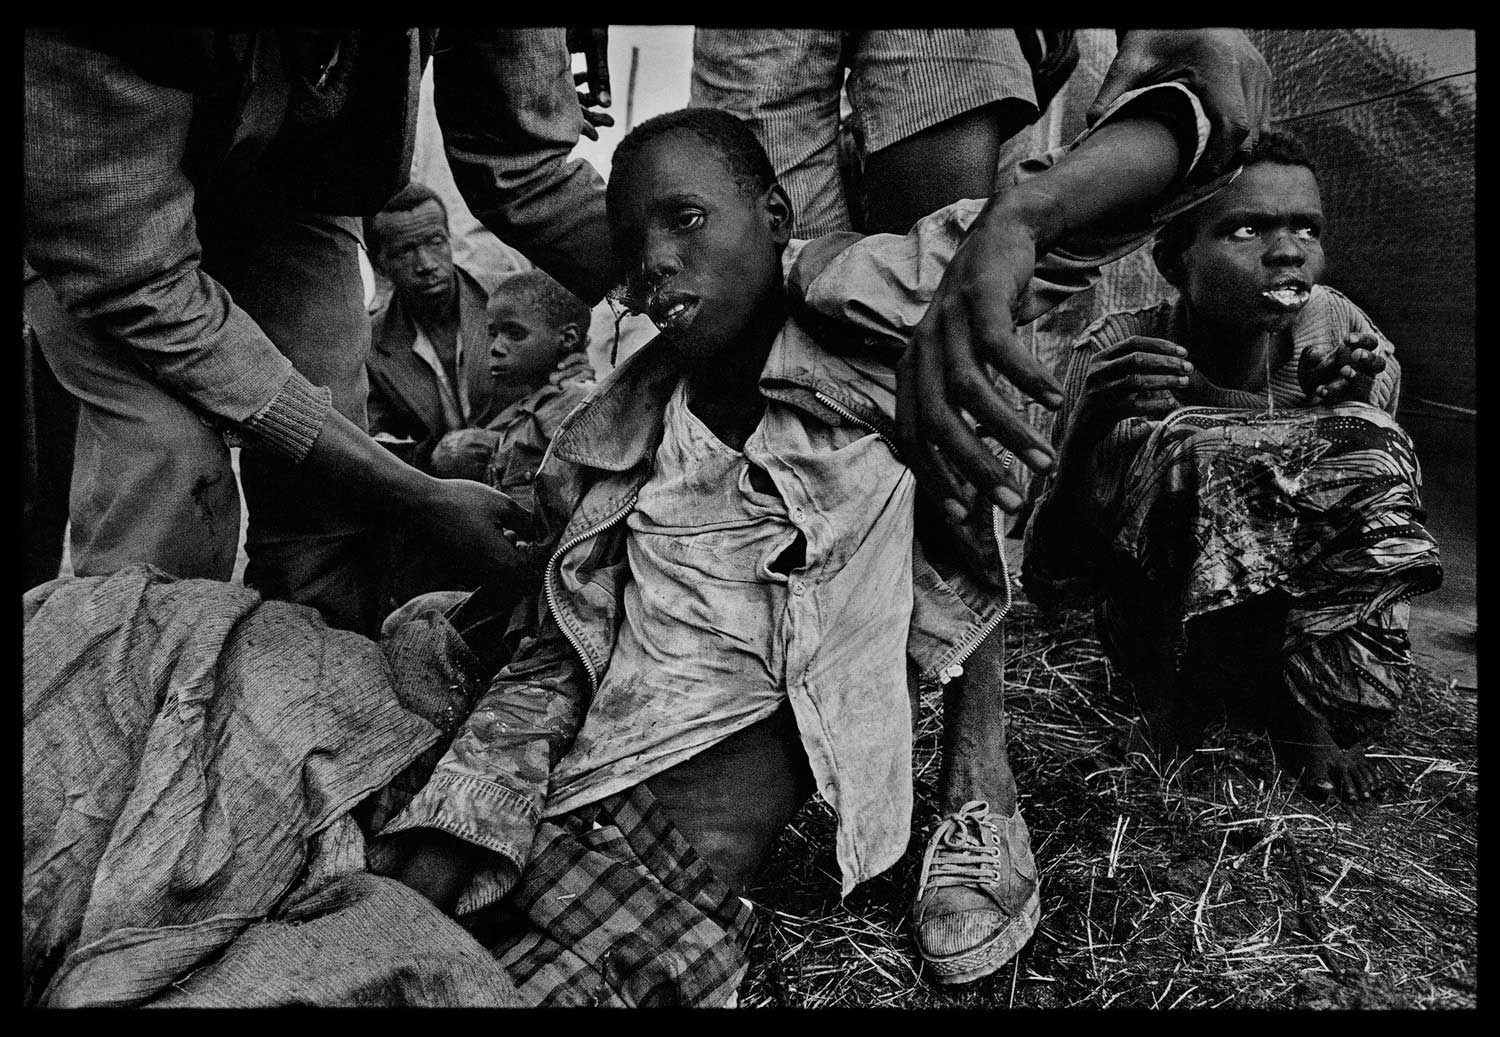 Refugees who had just been hit with cholera were brought to one of the emergency medical stations in Zaire, 1994.